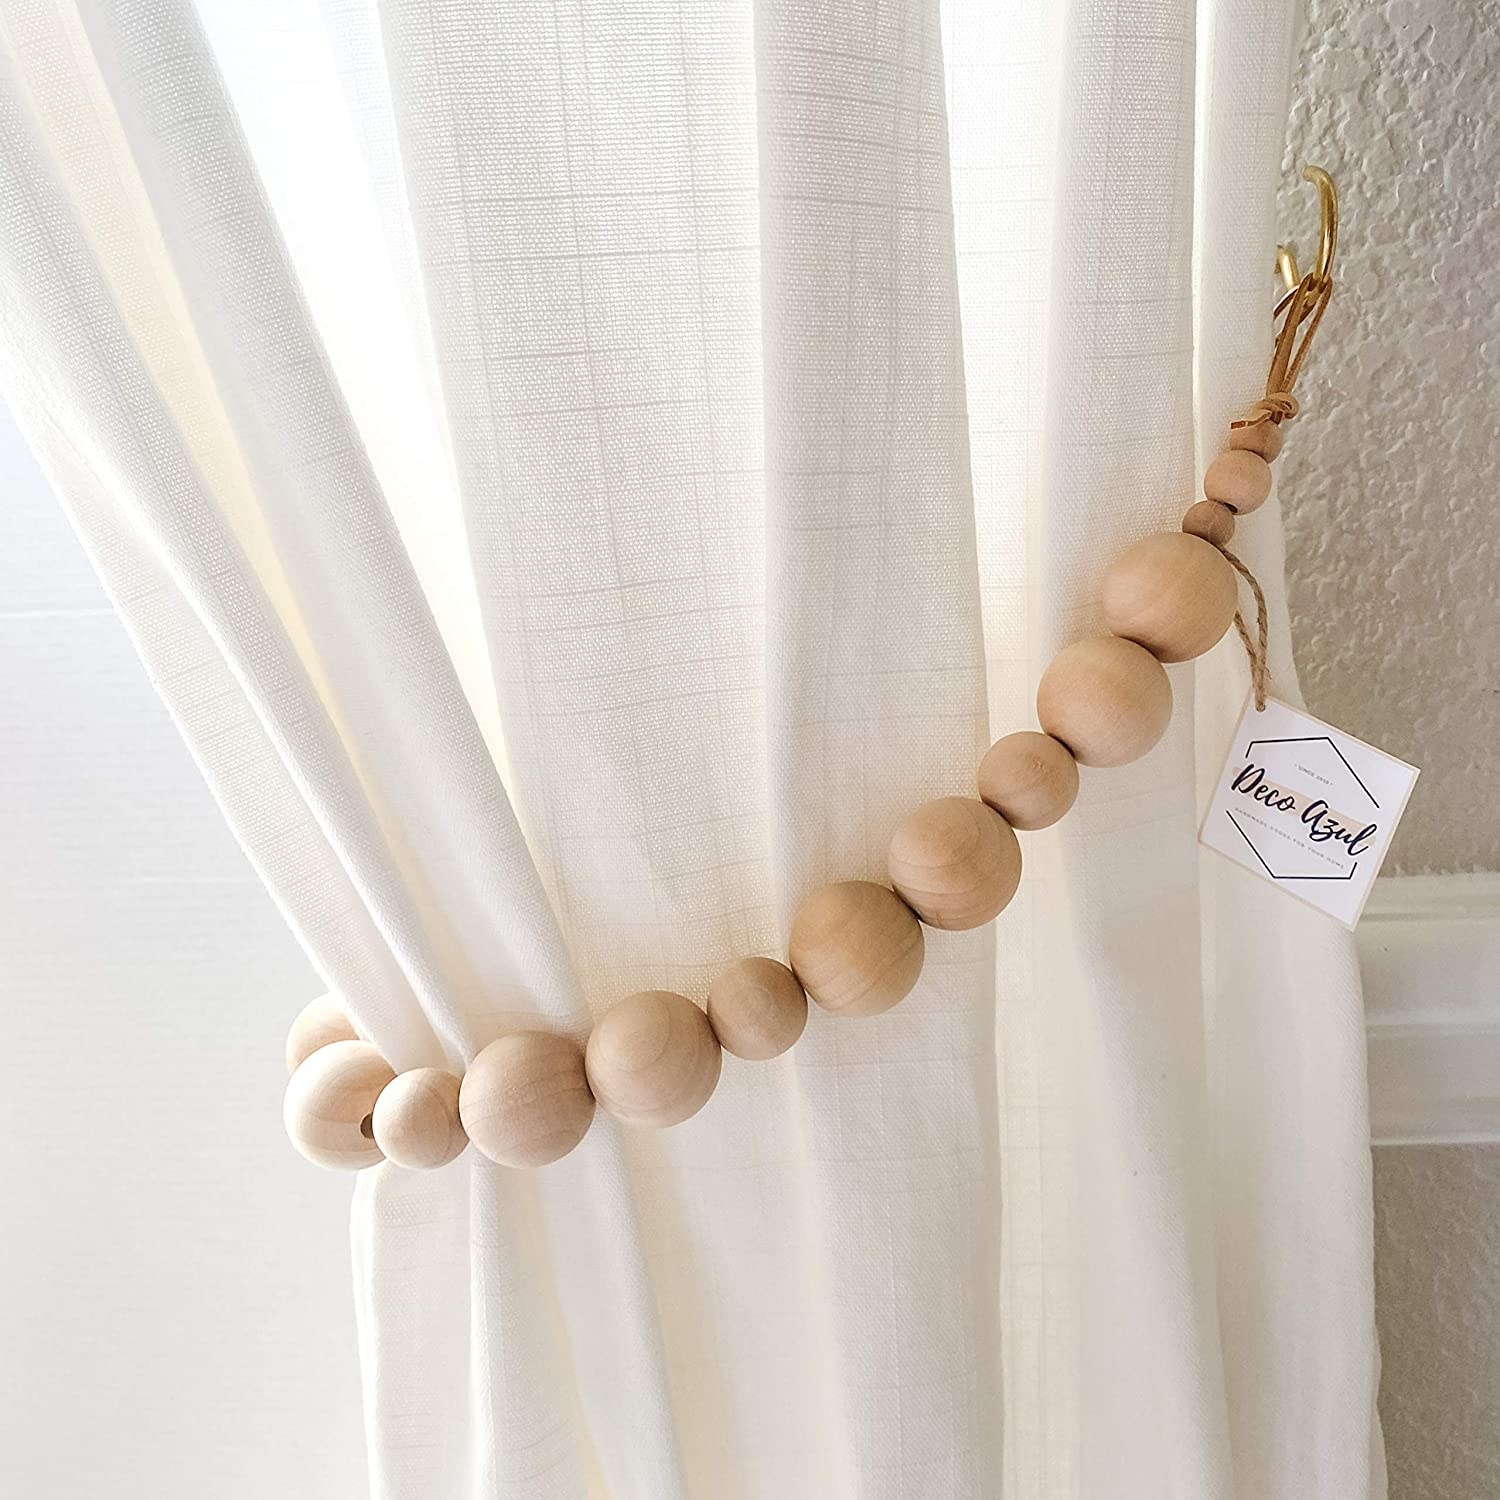 Bead 13/16" Double Bay Window Curtain Rod  20"-36",38"-72" choose from 3 colors 